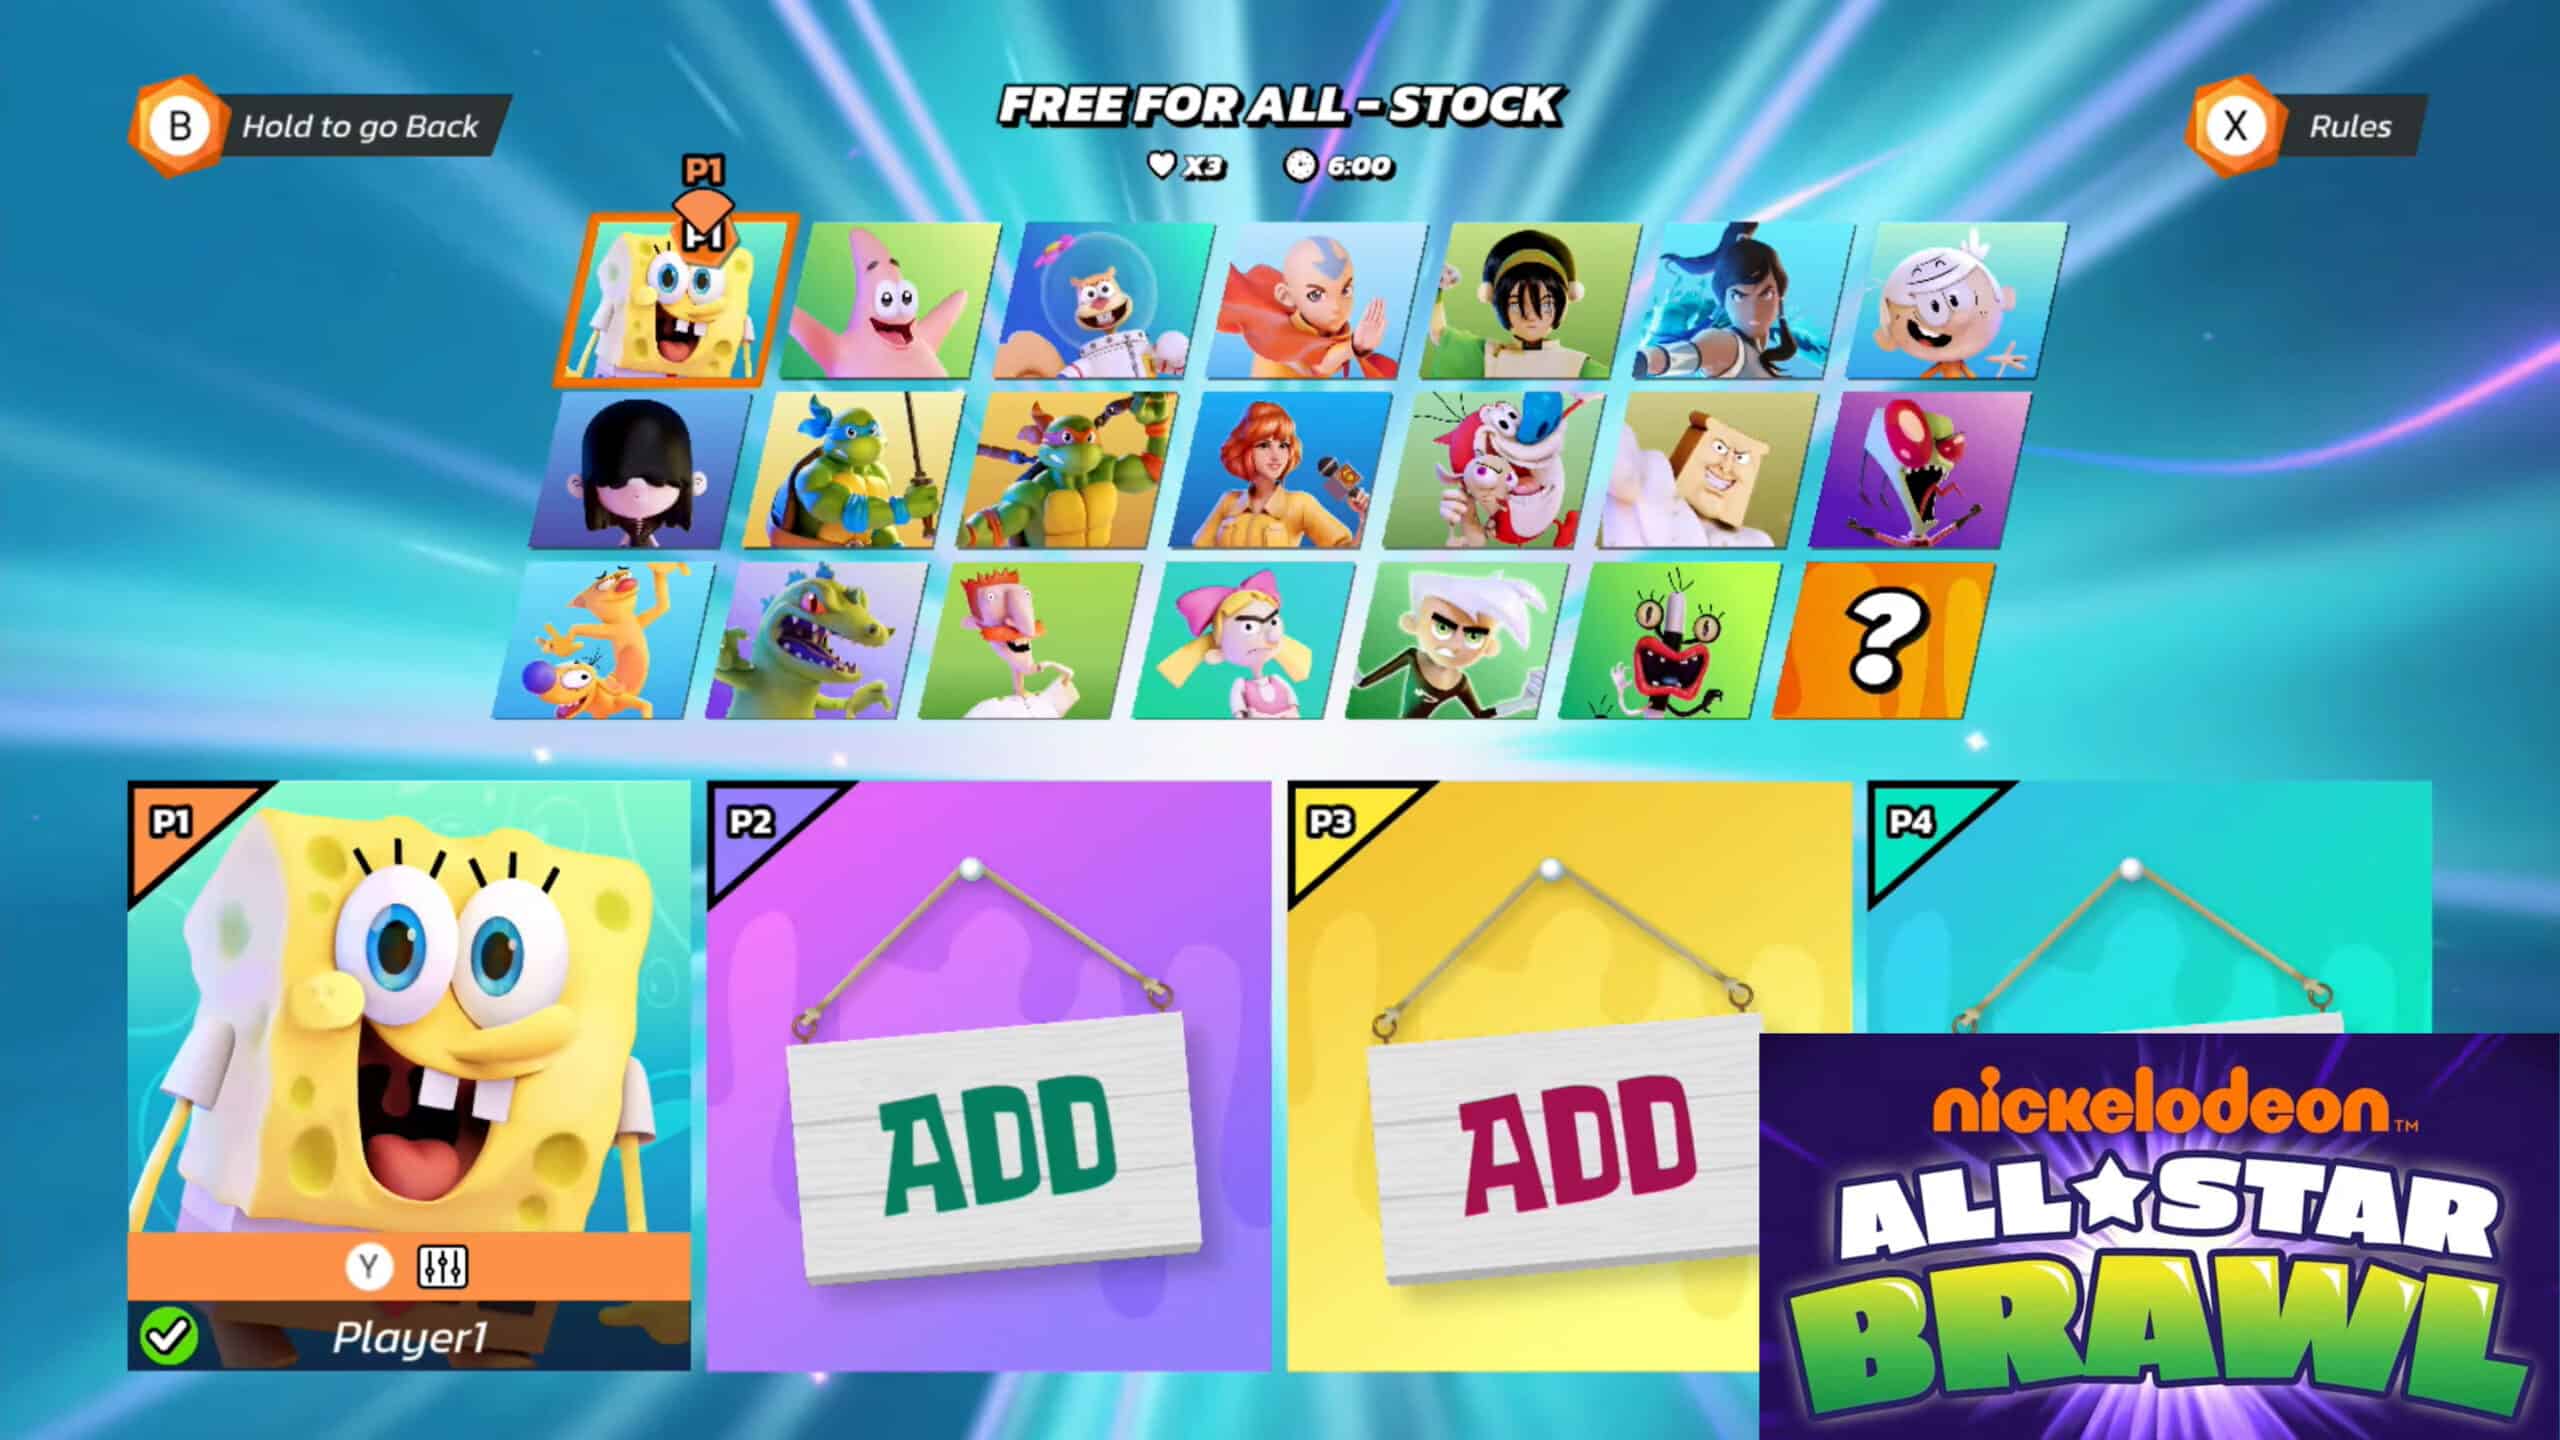 Nickelodeon All-Star Brawl Characters Roster